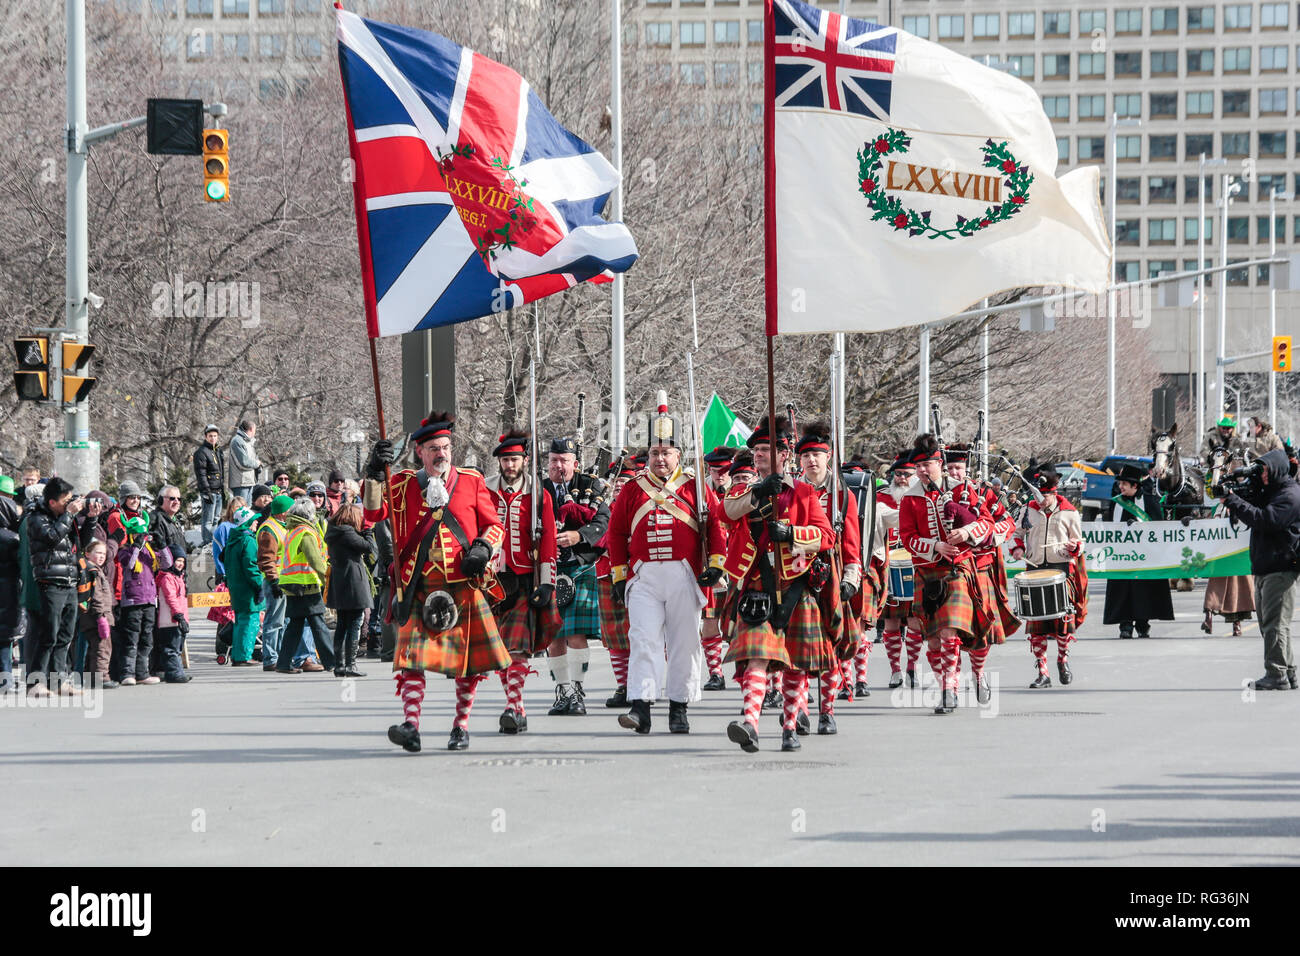 St Patrick Day Parade, Ottawa, Canada Banque D'Images